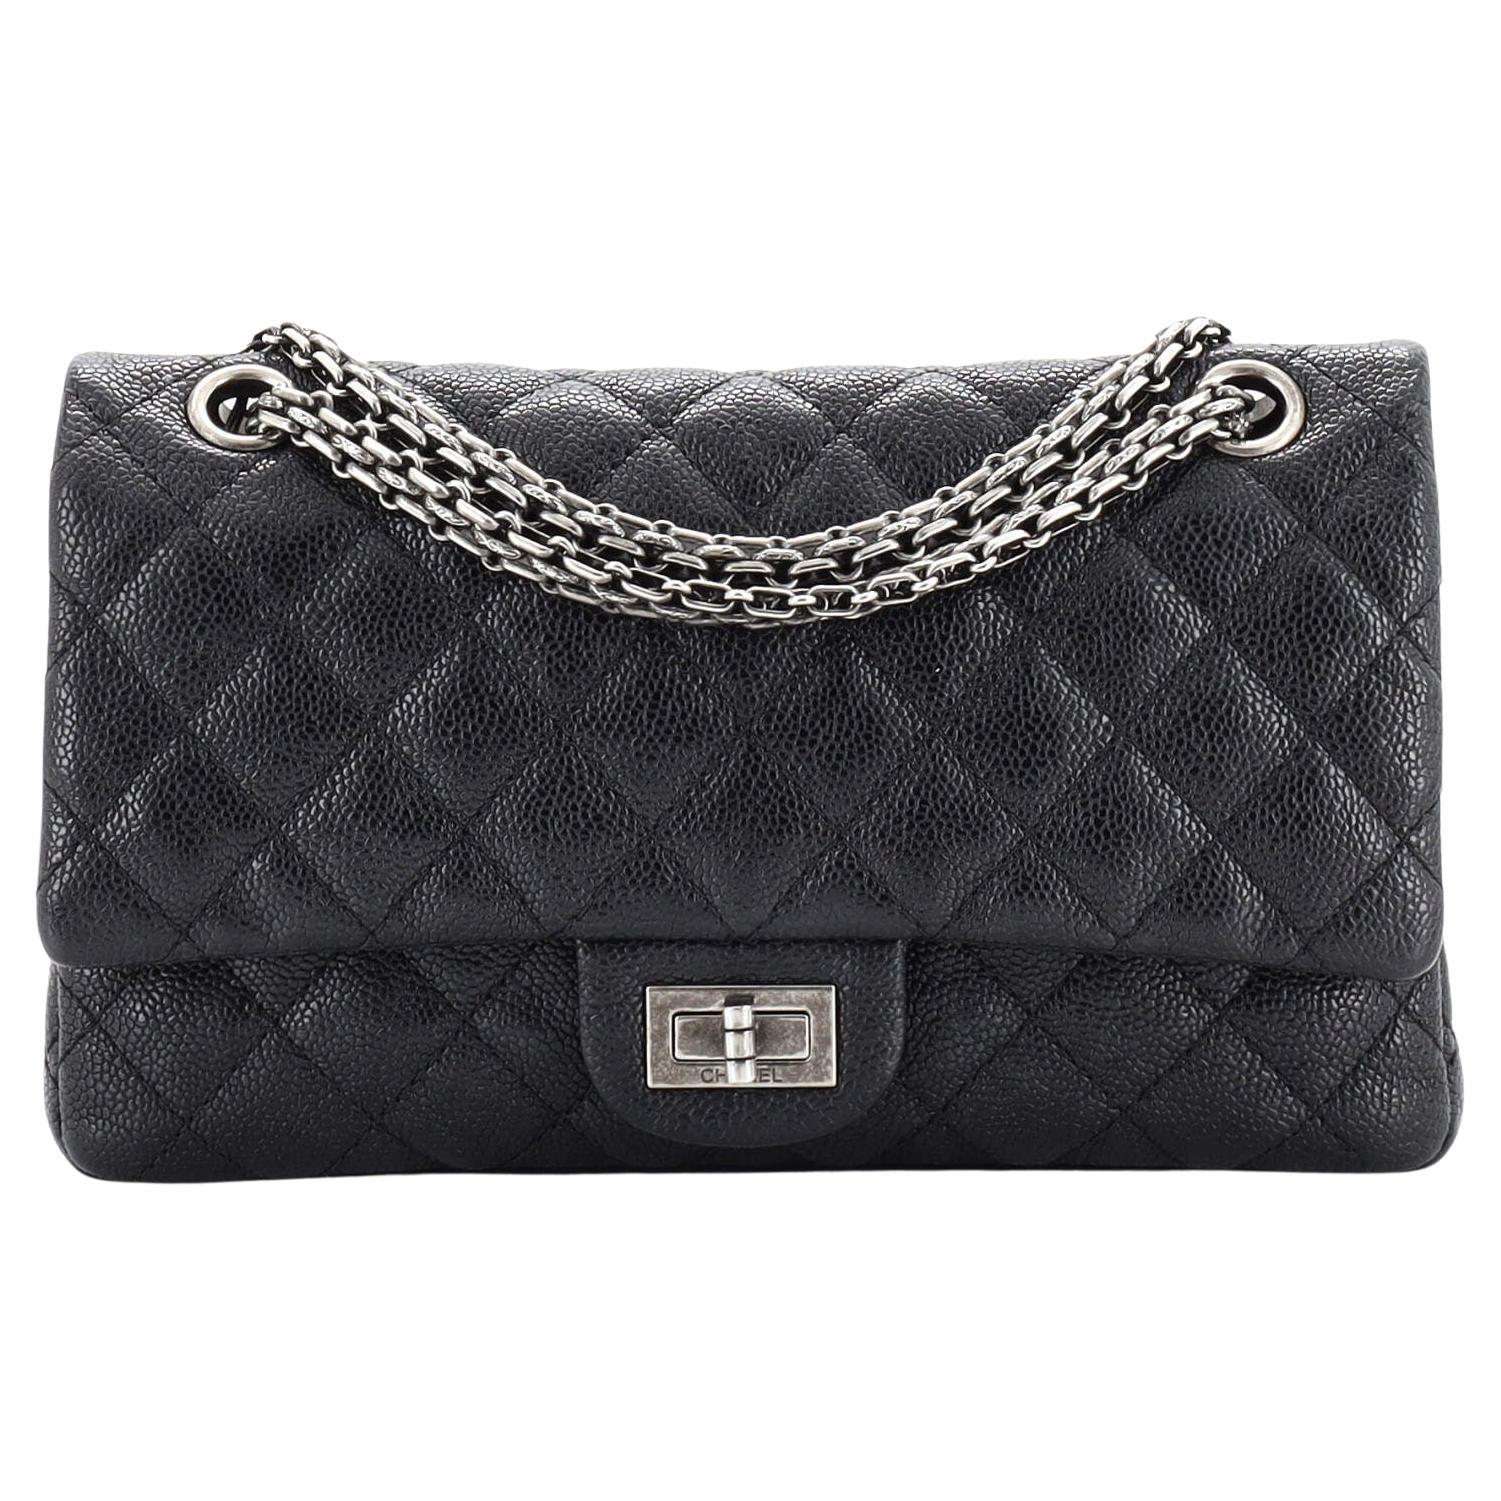 Chanel Reissue 2.55 Flap Bag Quilted Caviar 225